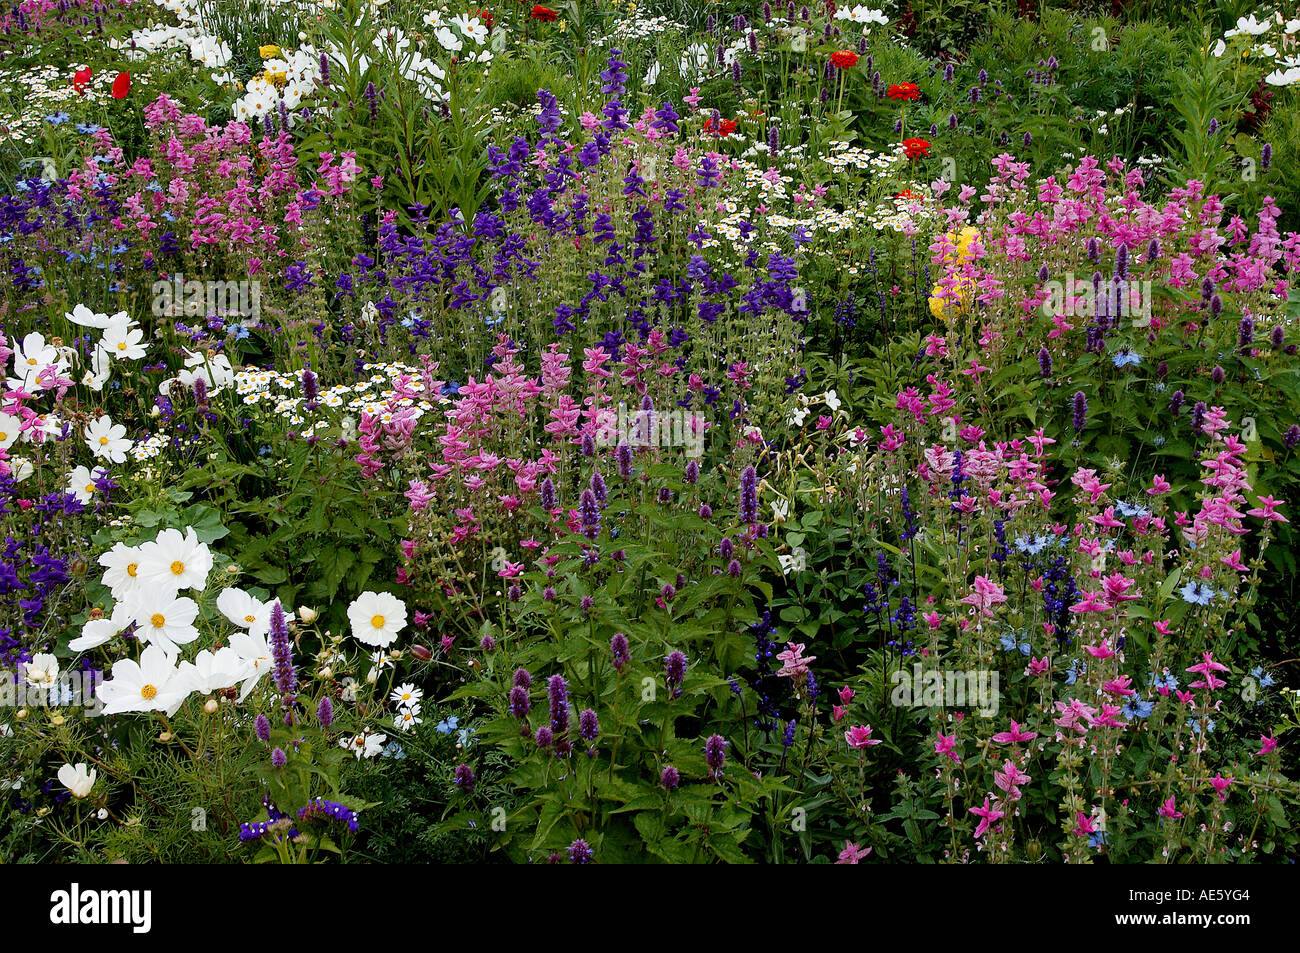 Bed of flowers with Cosmea, Musk Mallow, Black Cumin and Painted Sage (Cosmos bipinnatus), (Malva moschata alba) Stock Photo